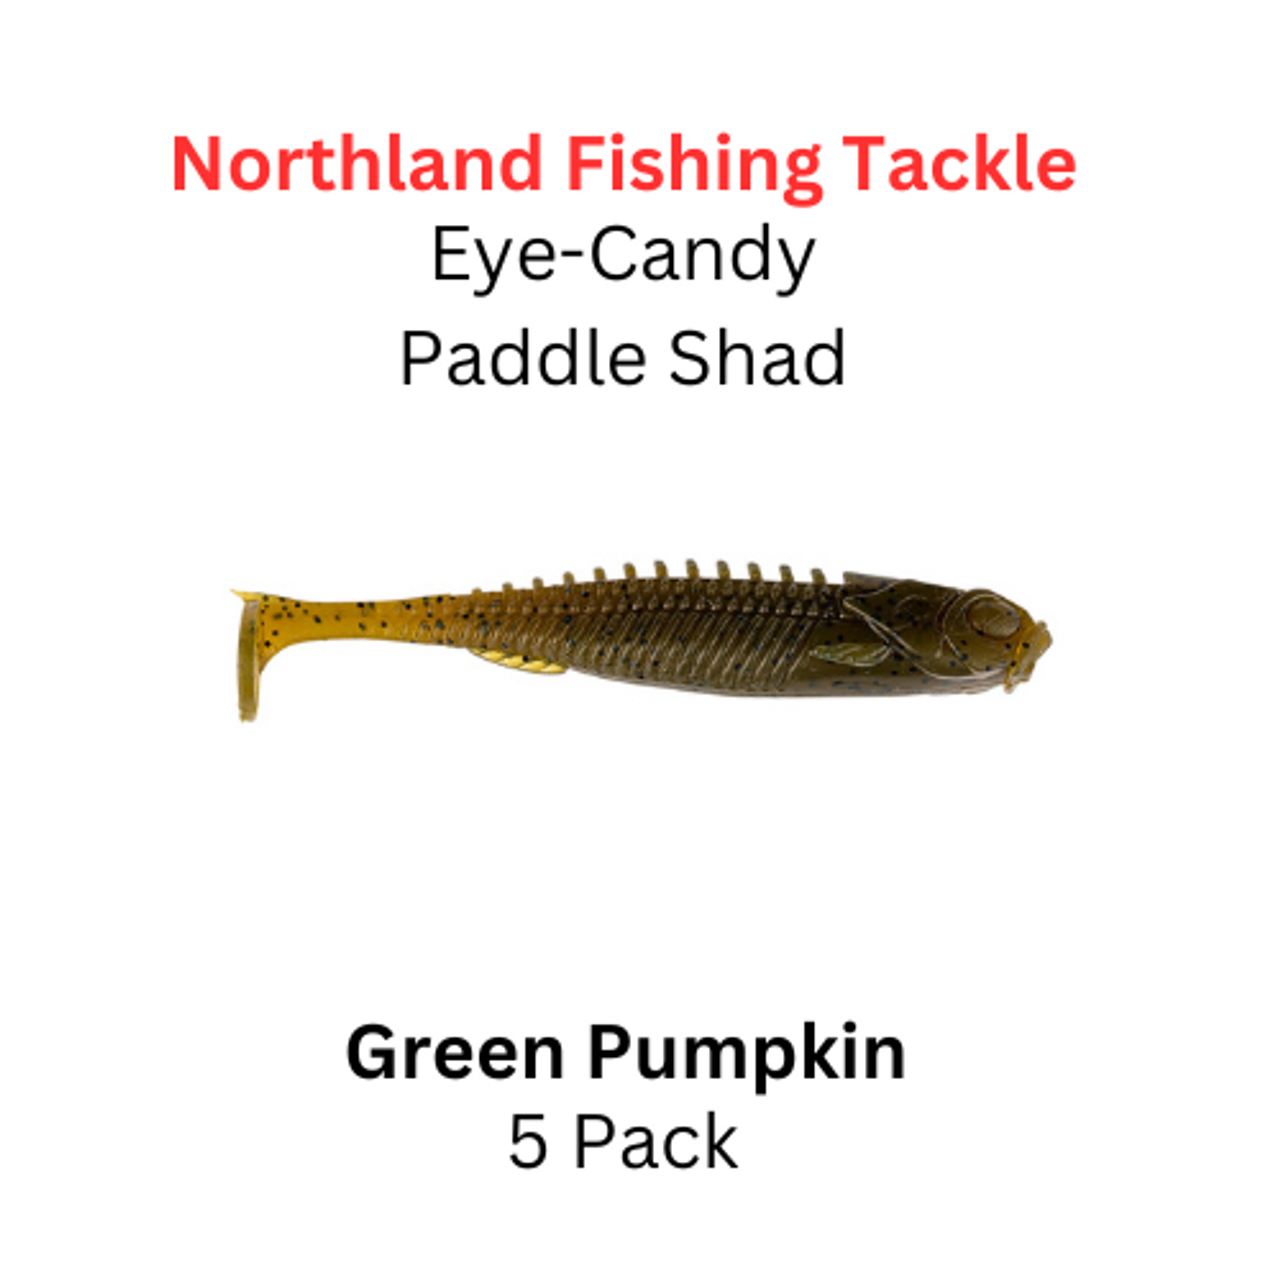 https://cdn11.bigcommerce.com/s-u9nbd/images/stencil/1280x1280/products/6668/16871/Northland_Fishing_Tackle_Eye_Candy_Paddle_Shad_Green_Pumpkin__74739.1688760941.png?c=2